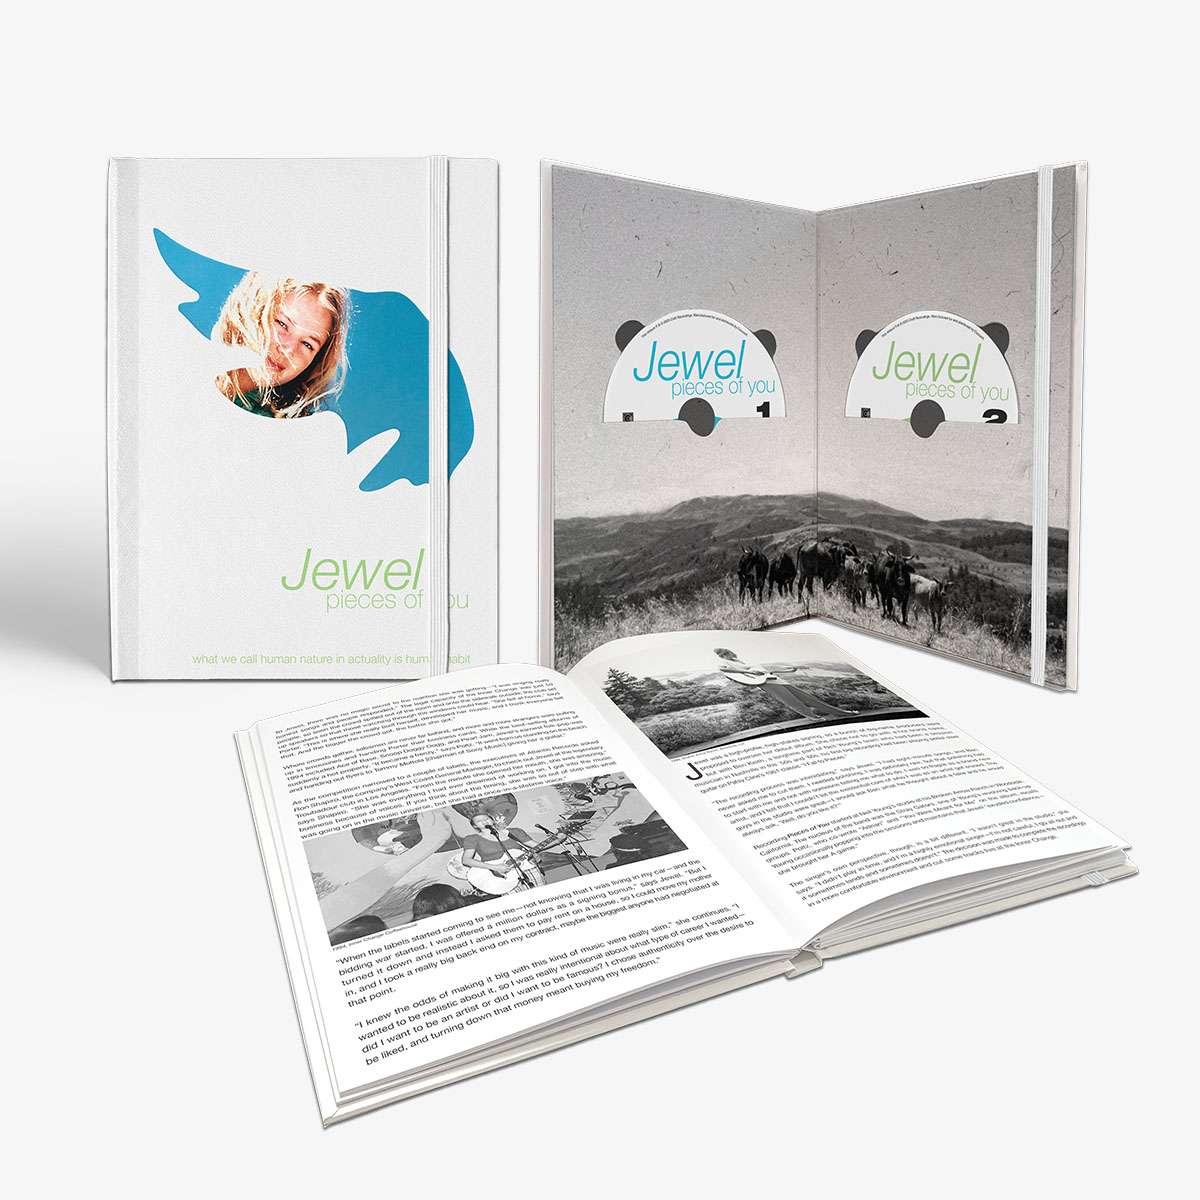 Jewel - Pieces of You - 25th Anniversary Release